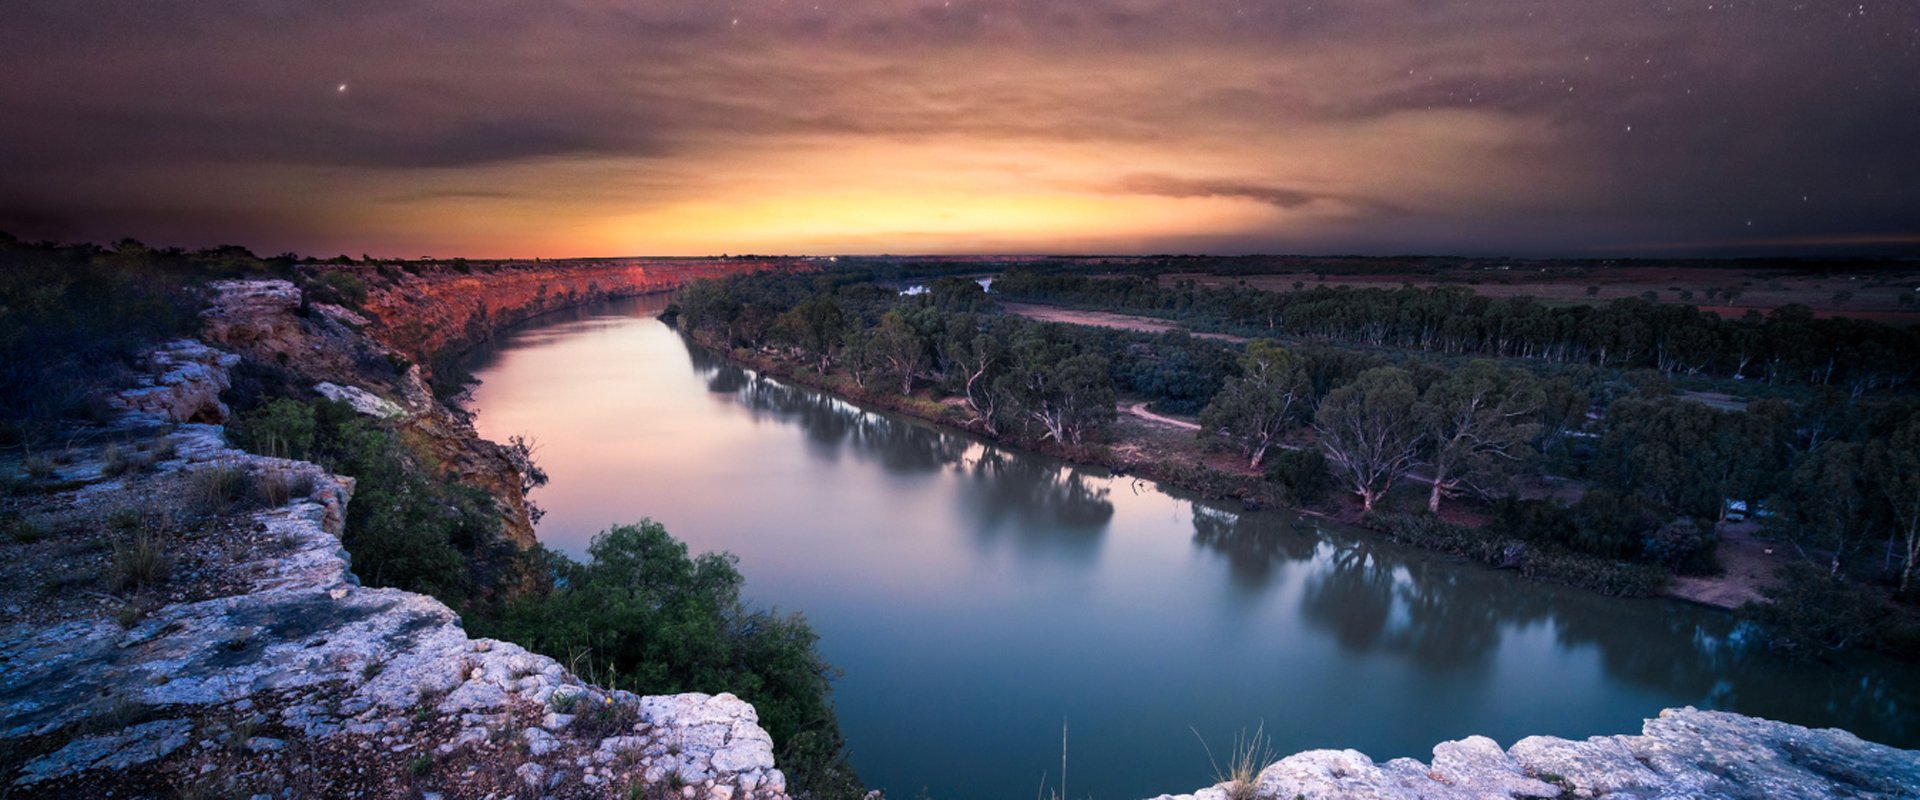 The Big Bend, Murray River